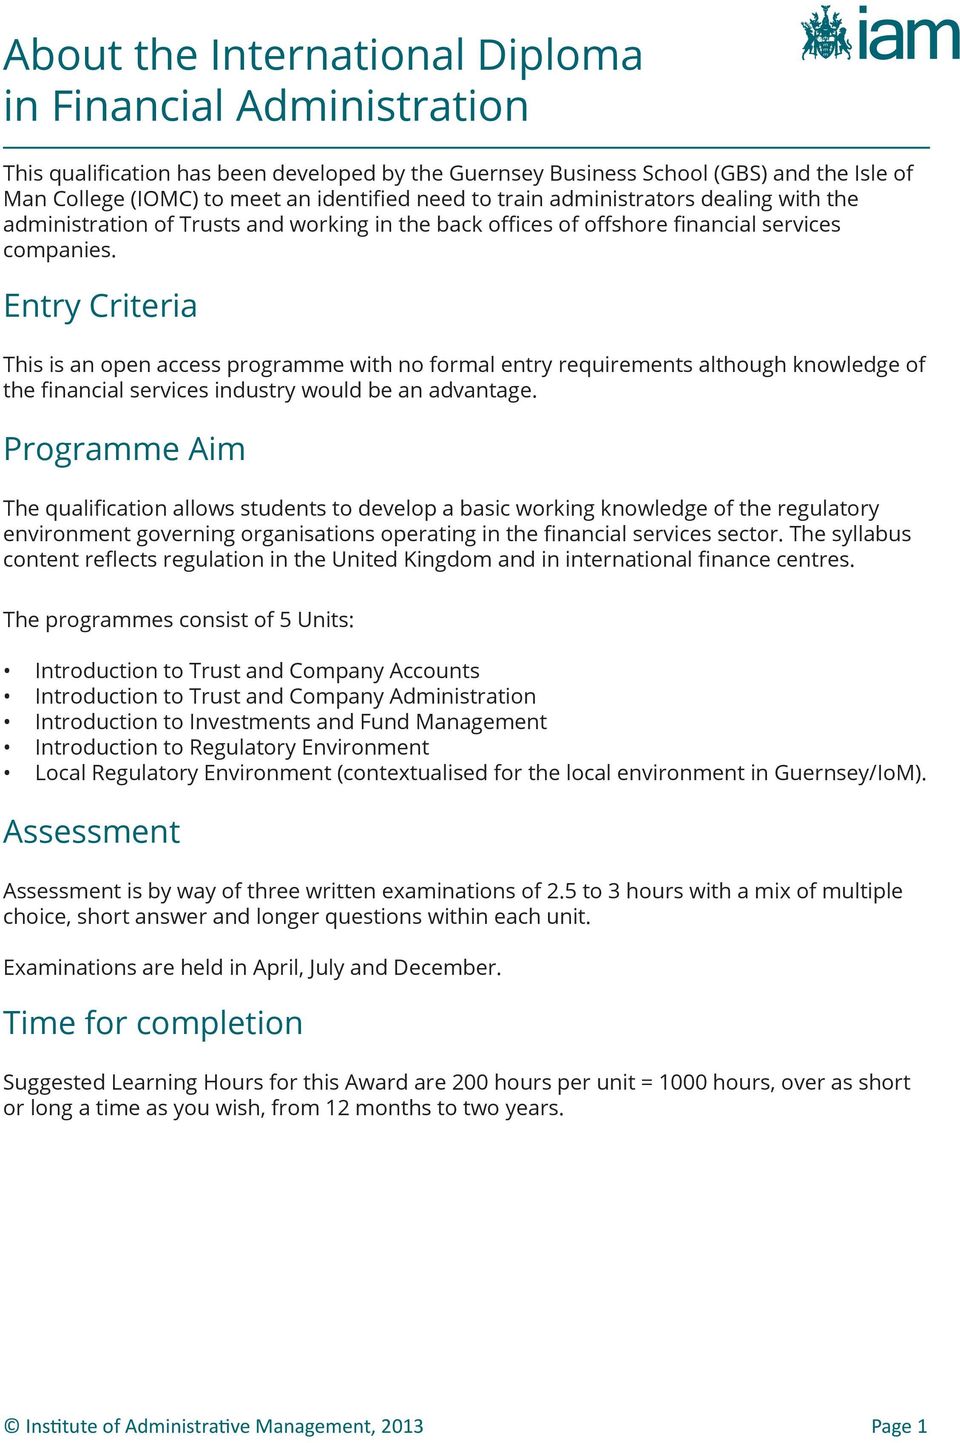 Entry Criteria This is an open access programme with no formal entry requirements although knowledge of the financial services industry would be an advantage.